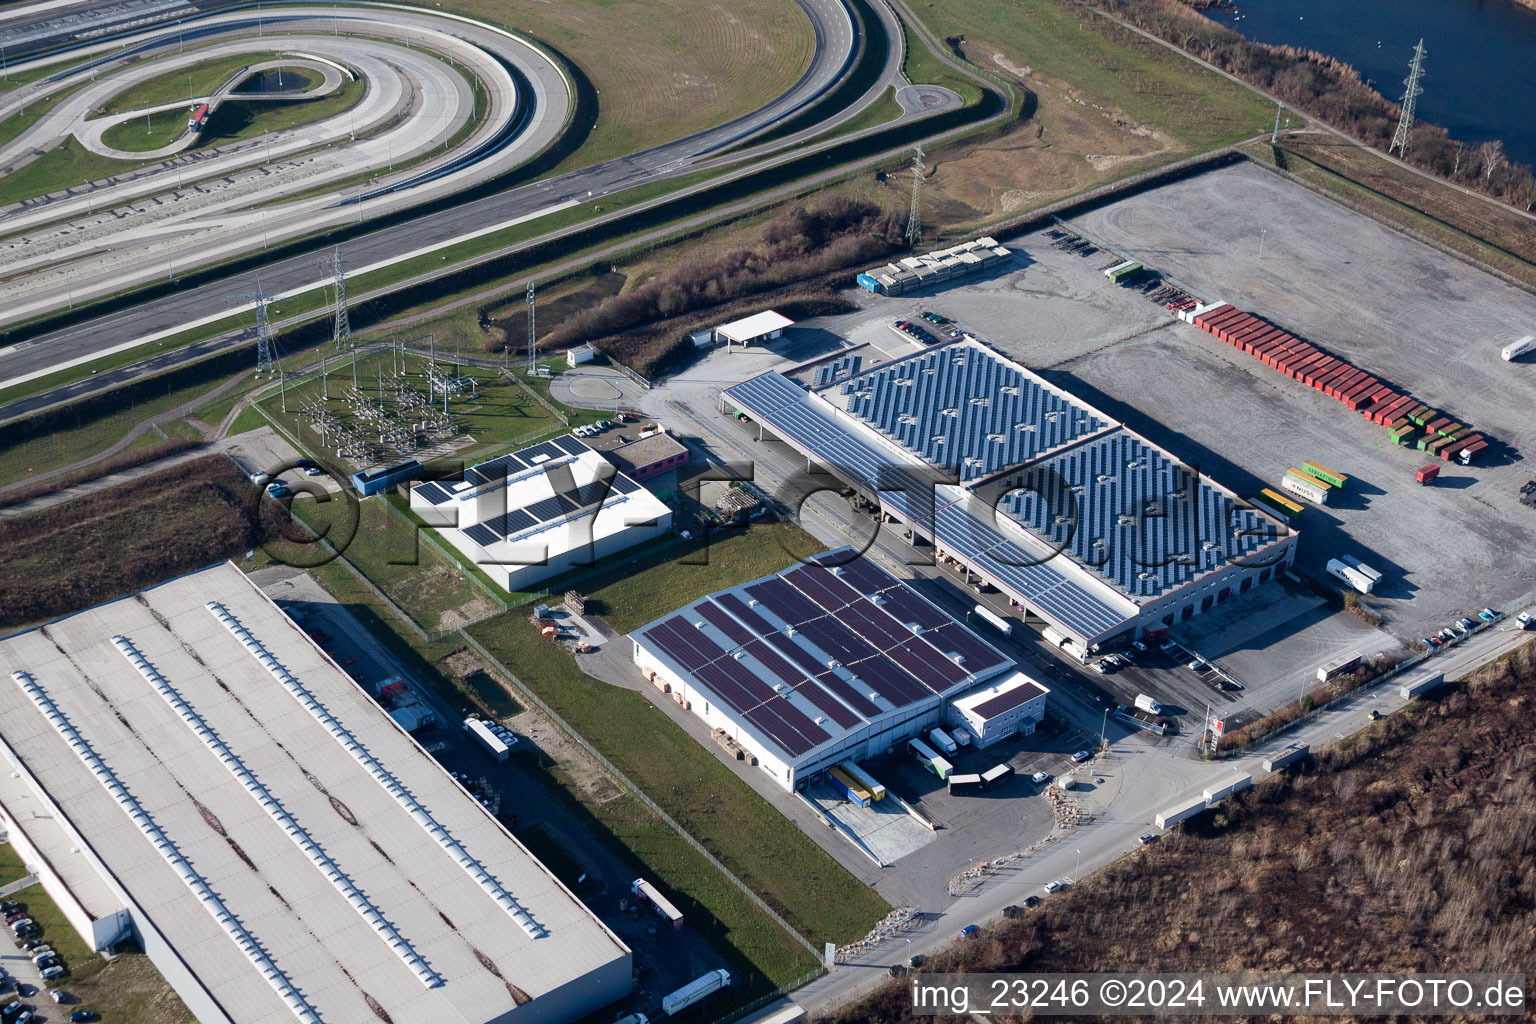 Aerial view of Building and production halls on the premises of Europack GmbH in the district Industriegebiet Woerth-Oberwald in Woerth am Rhein in the state Rhineland-Palatinate